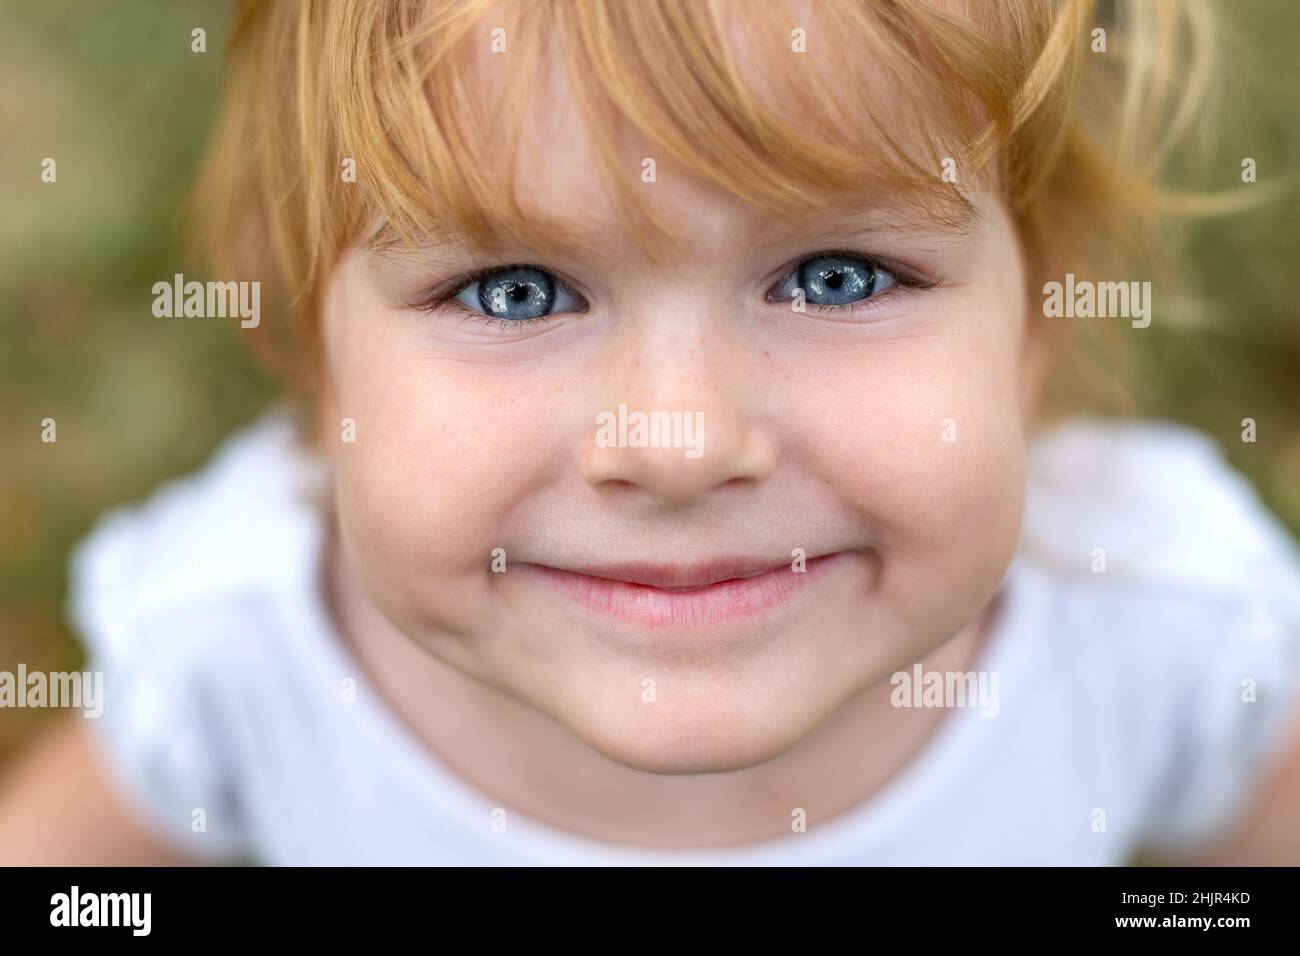 Happy smiling child face close up. Beautiful happy girl with blue eyes and blonde hair. Cute little kid smiling in a park, looking straight in camera Stock Photo